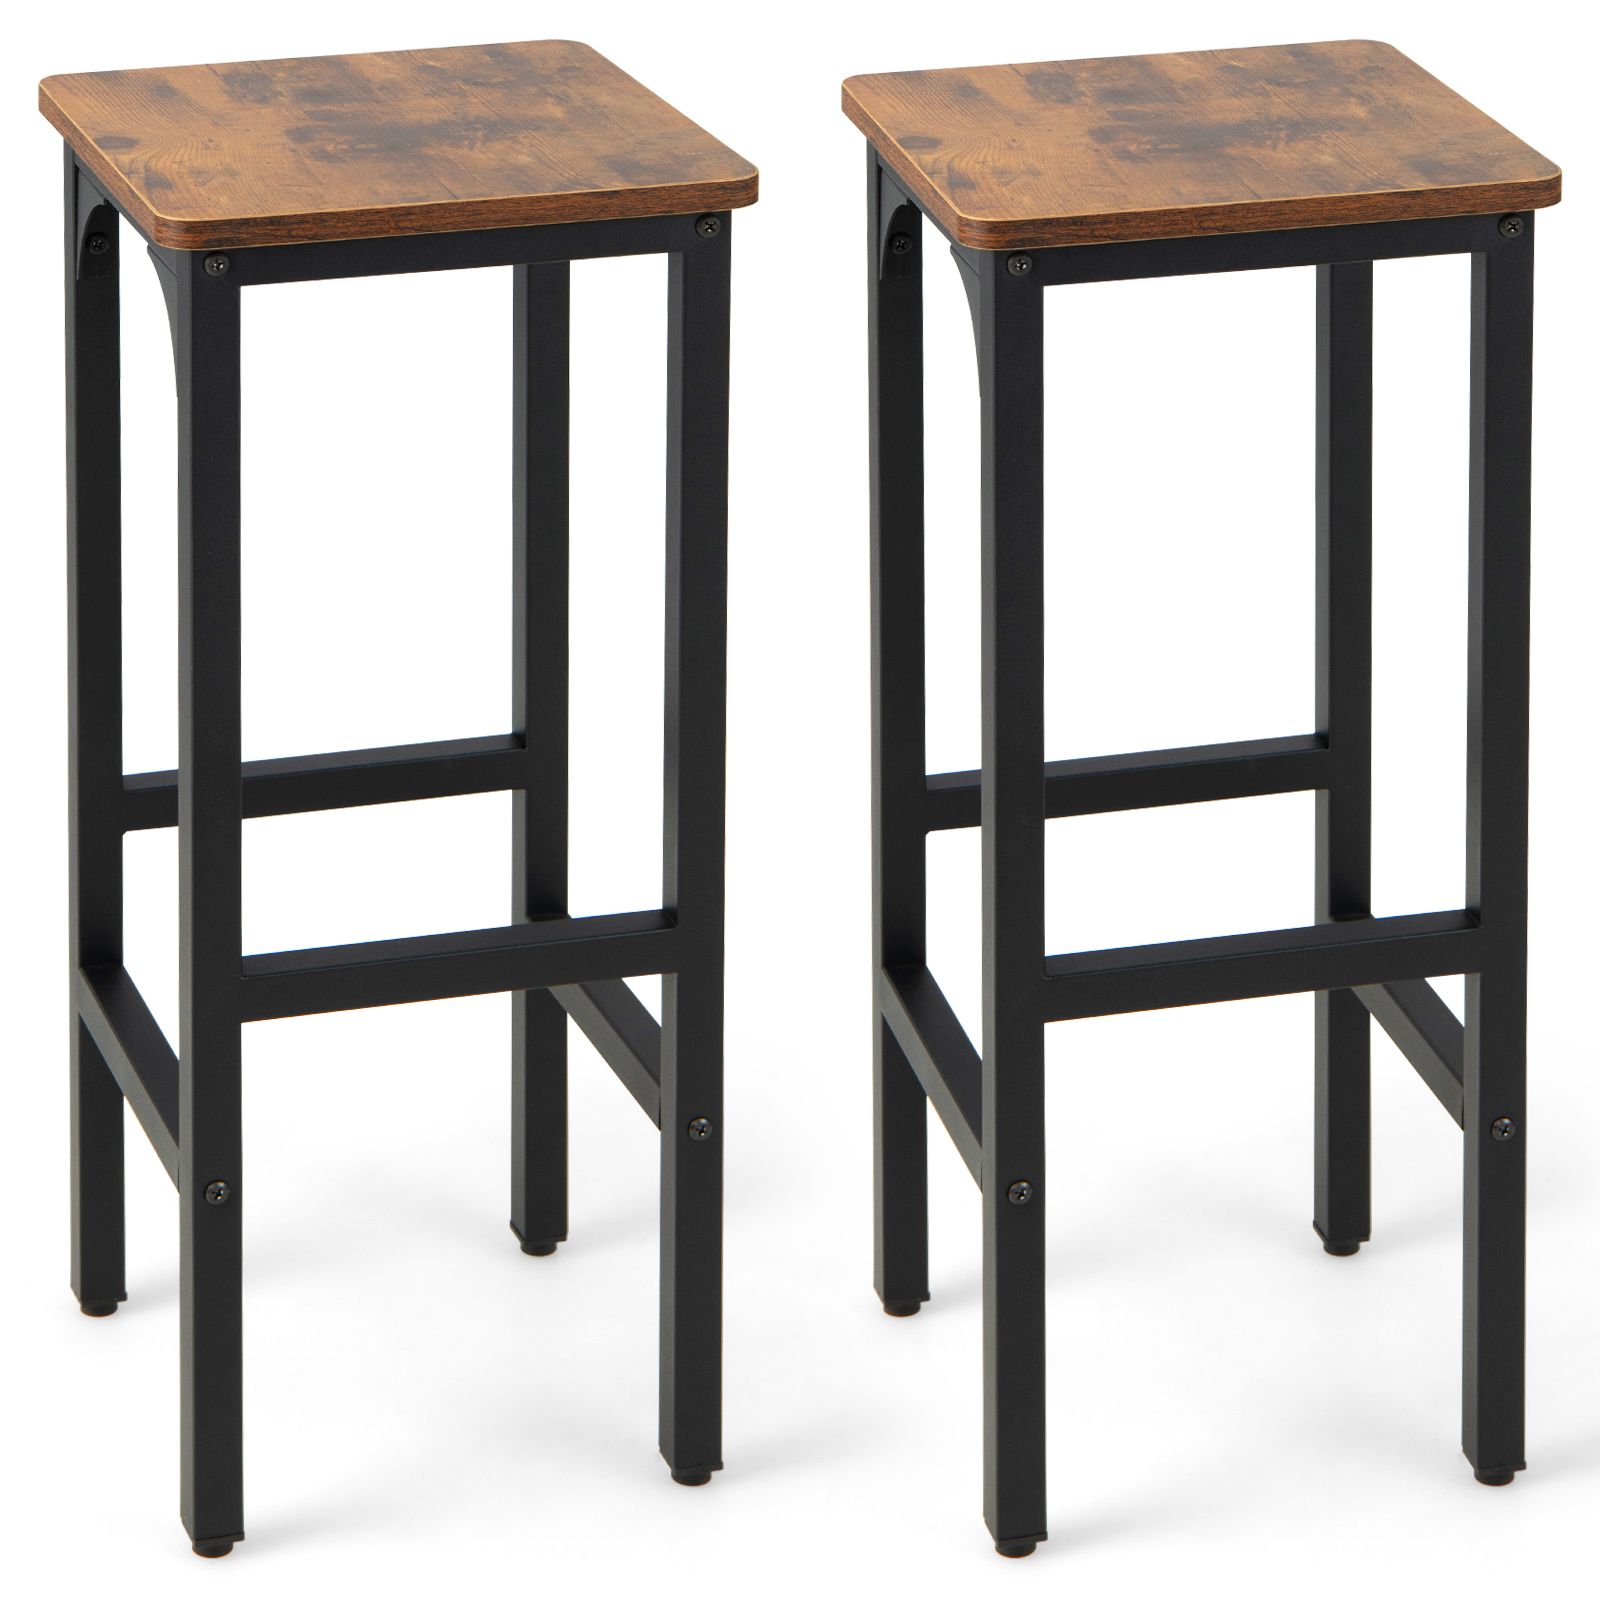 30 x 30 x 71cm Bar Stools Set of 2 with Footrest and Adjustable Pads